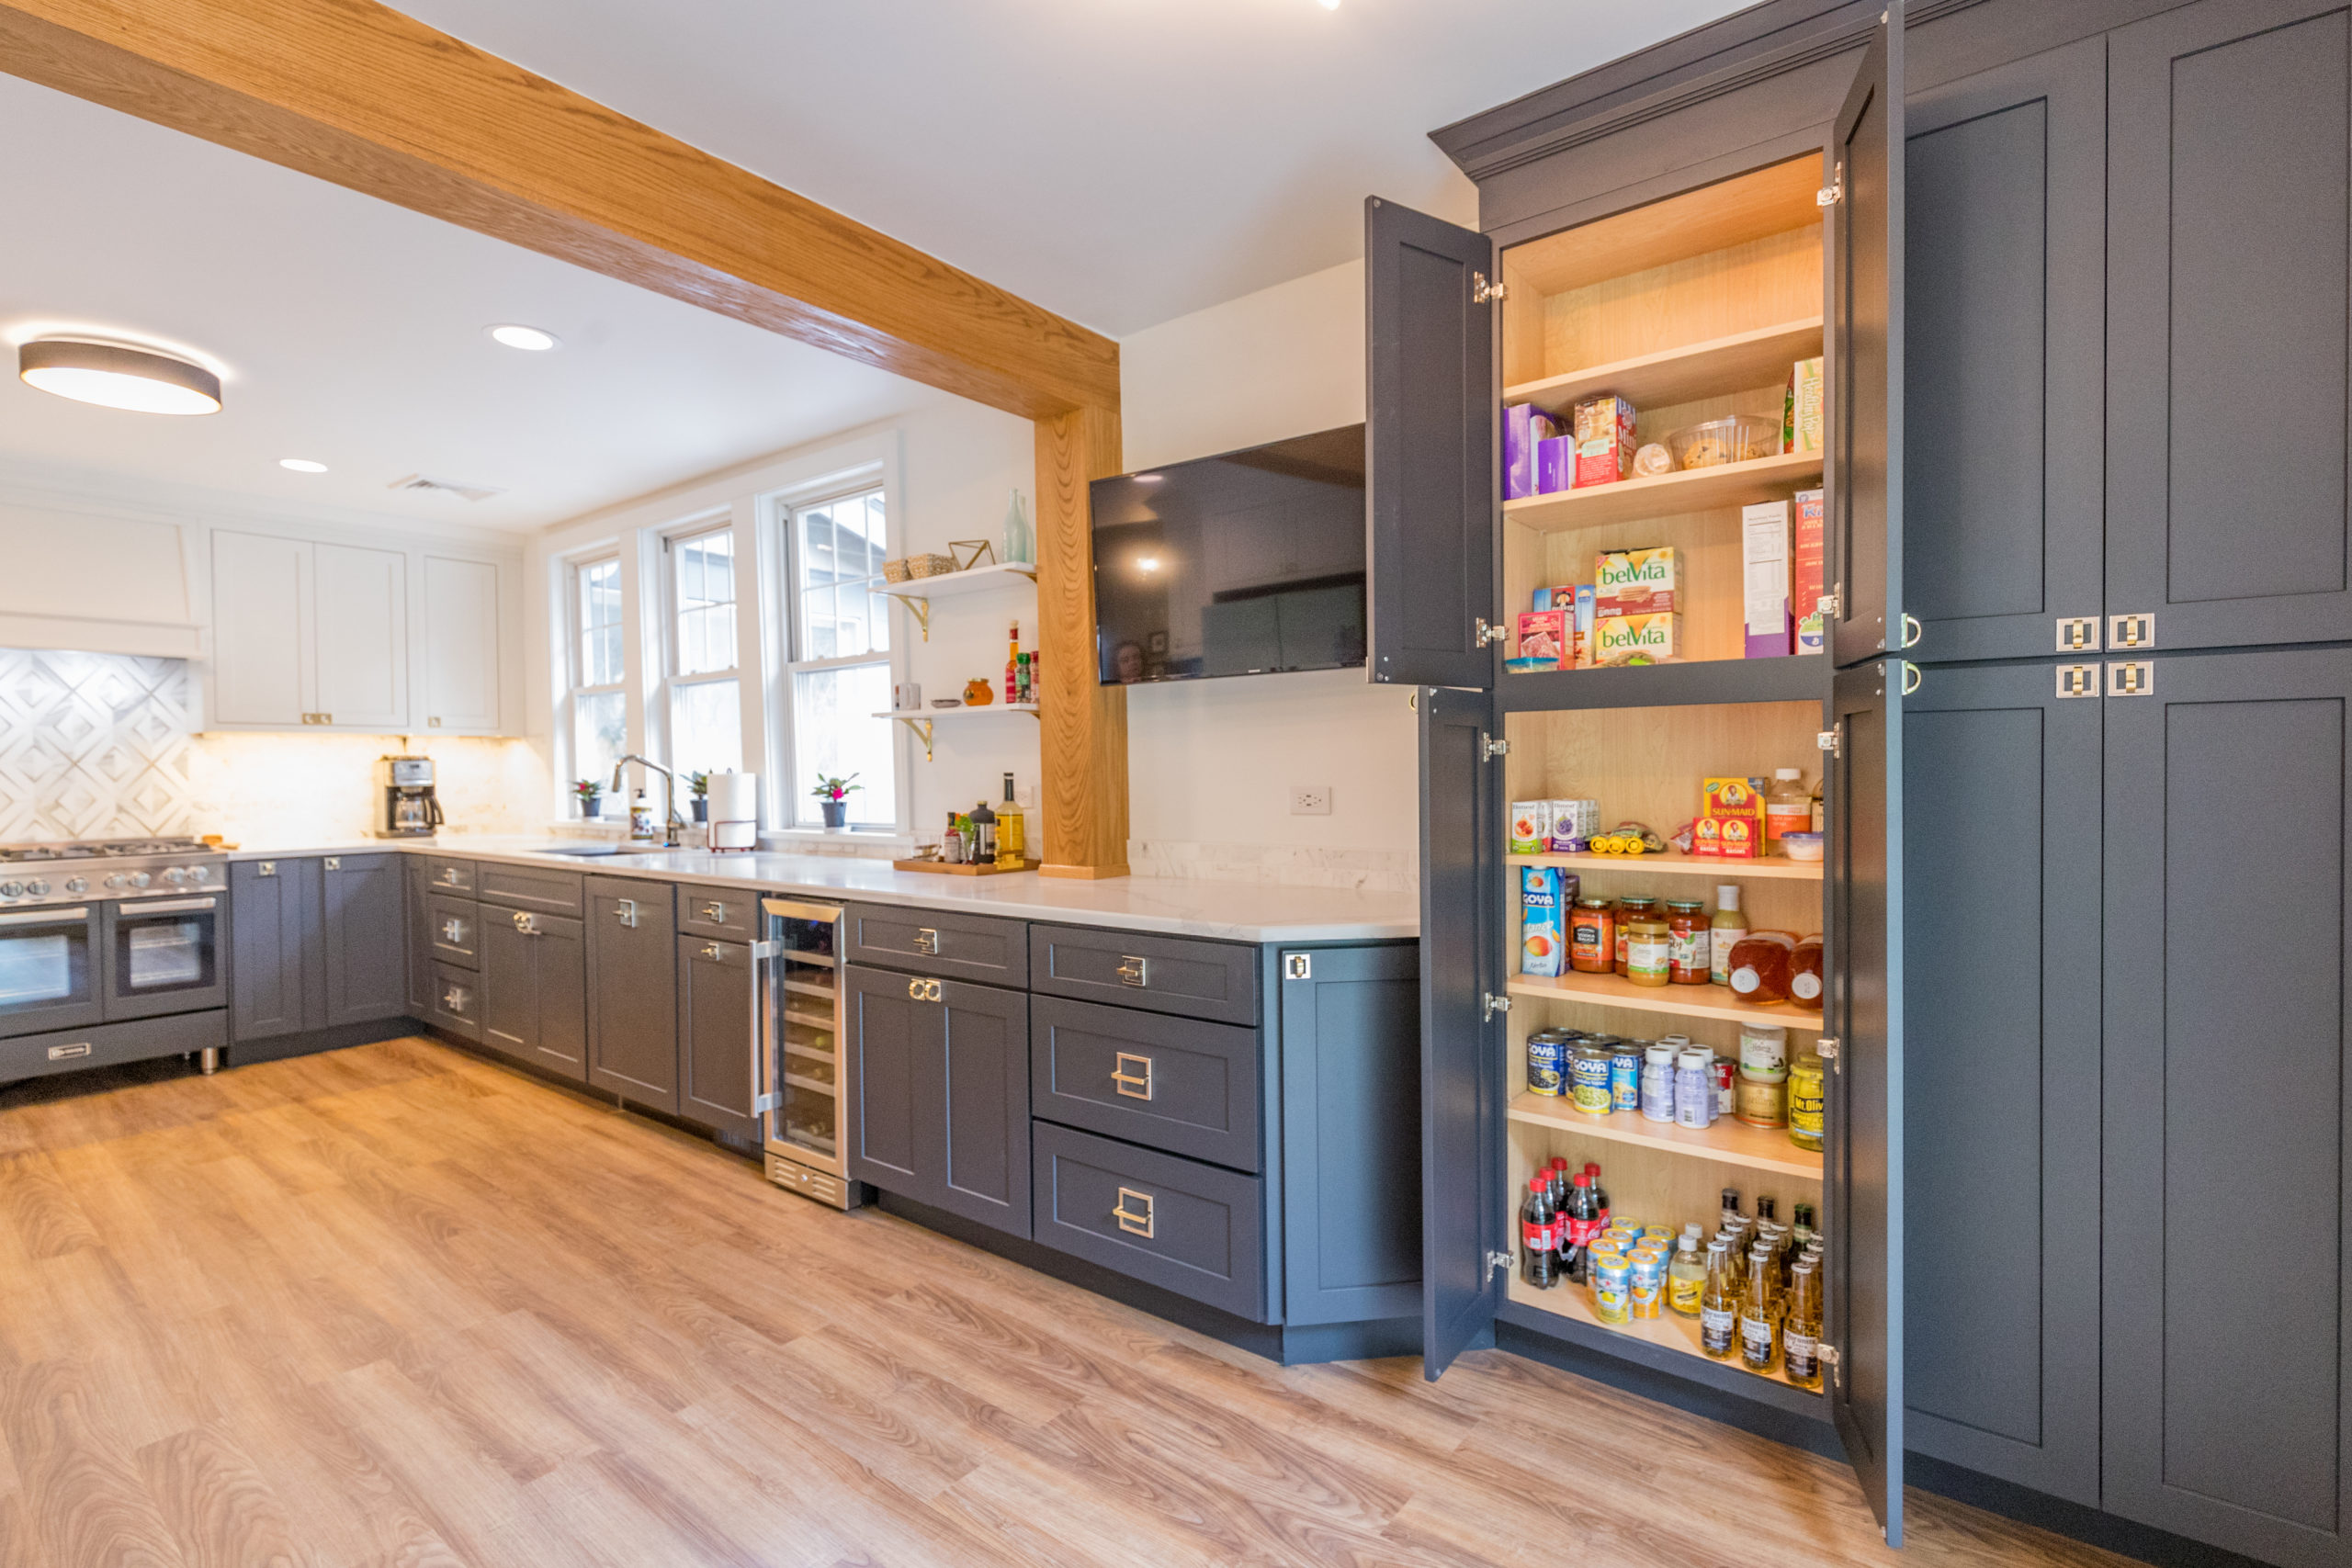 gray kitchen cabinets in a large kitchen with white countertop and large pantry shelf after renovation